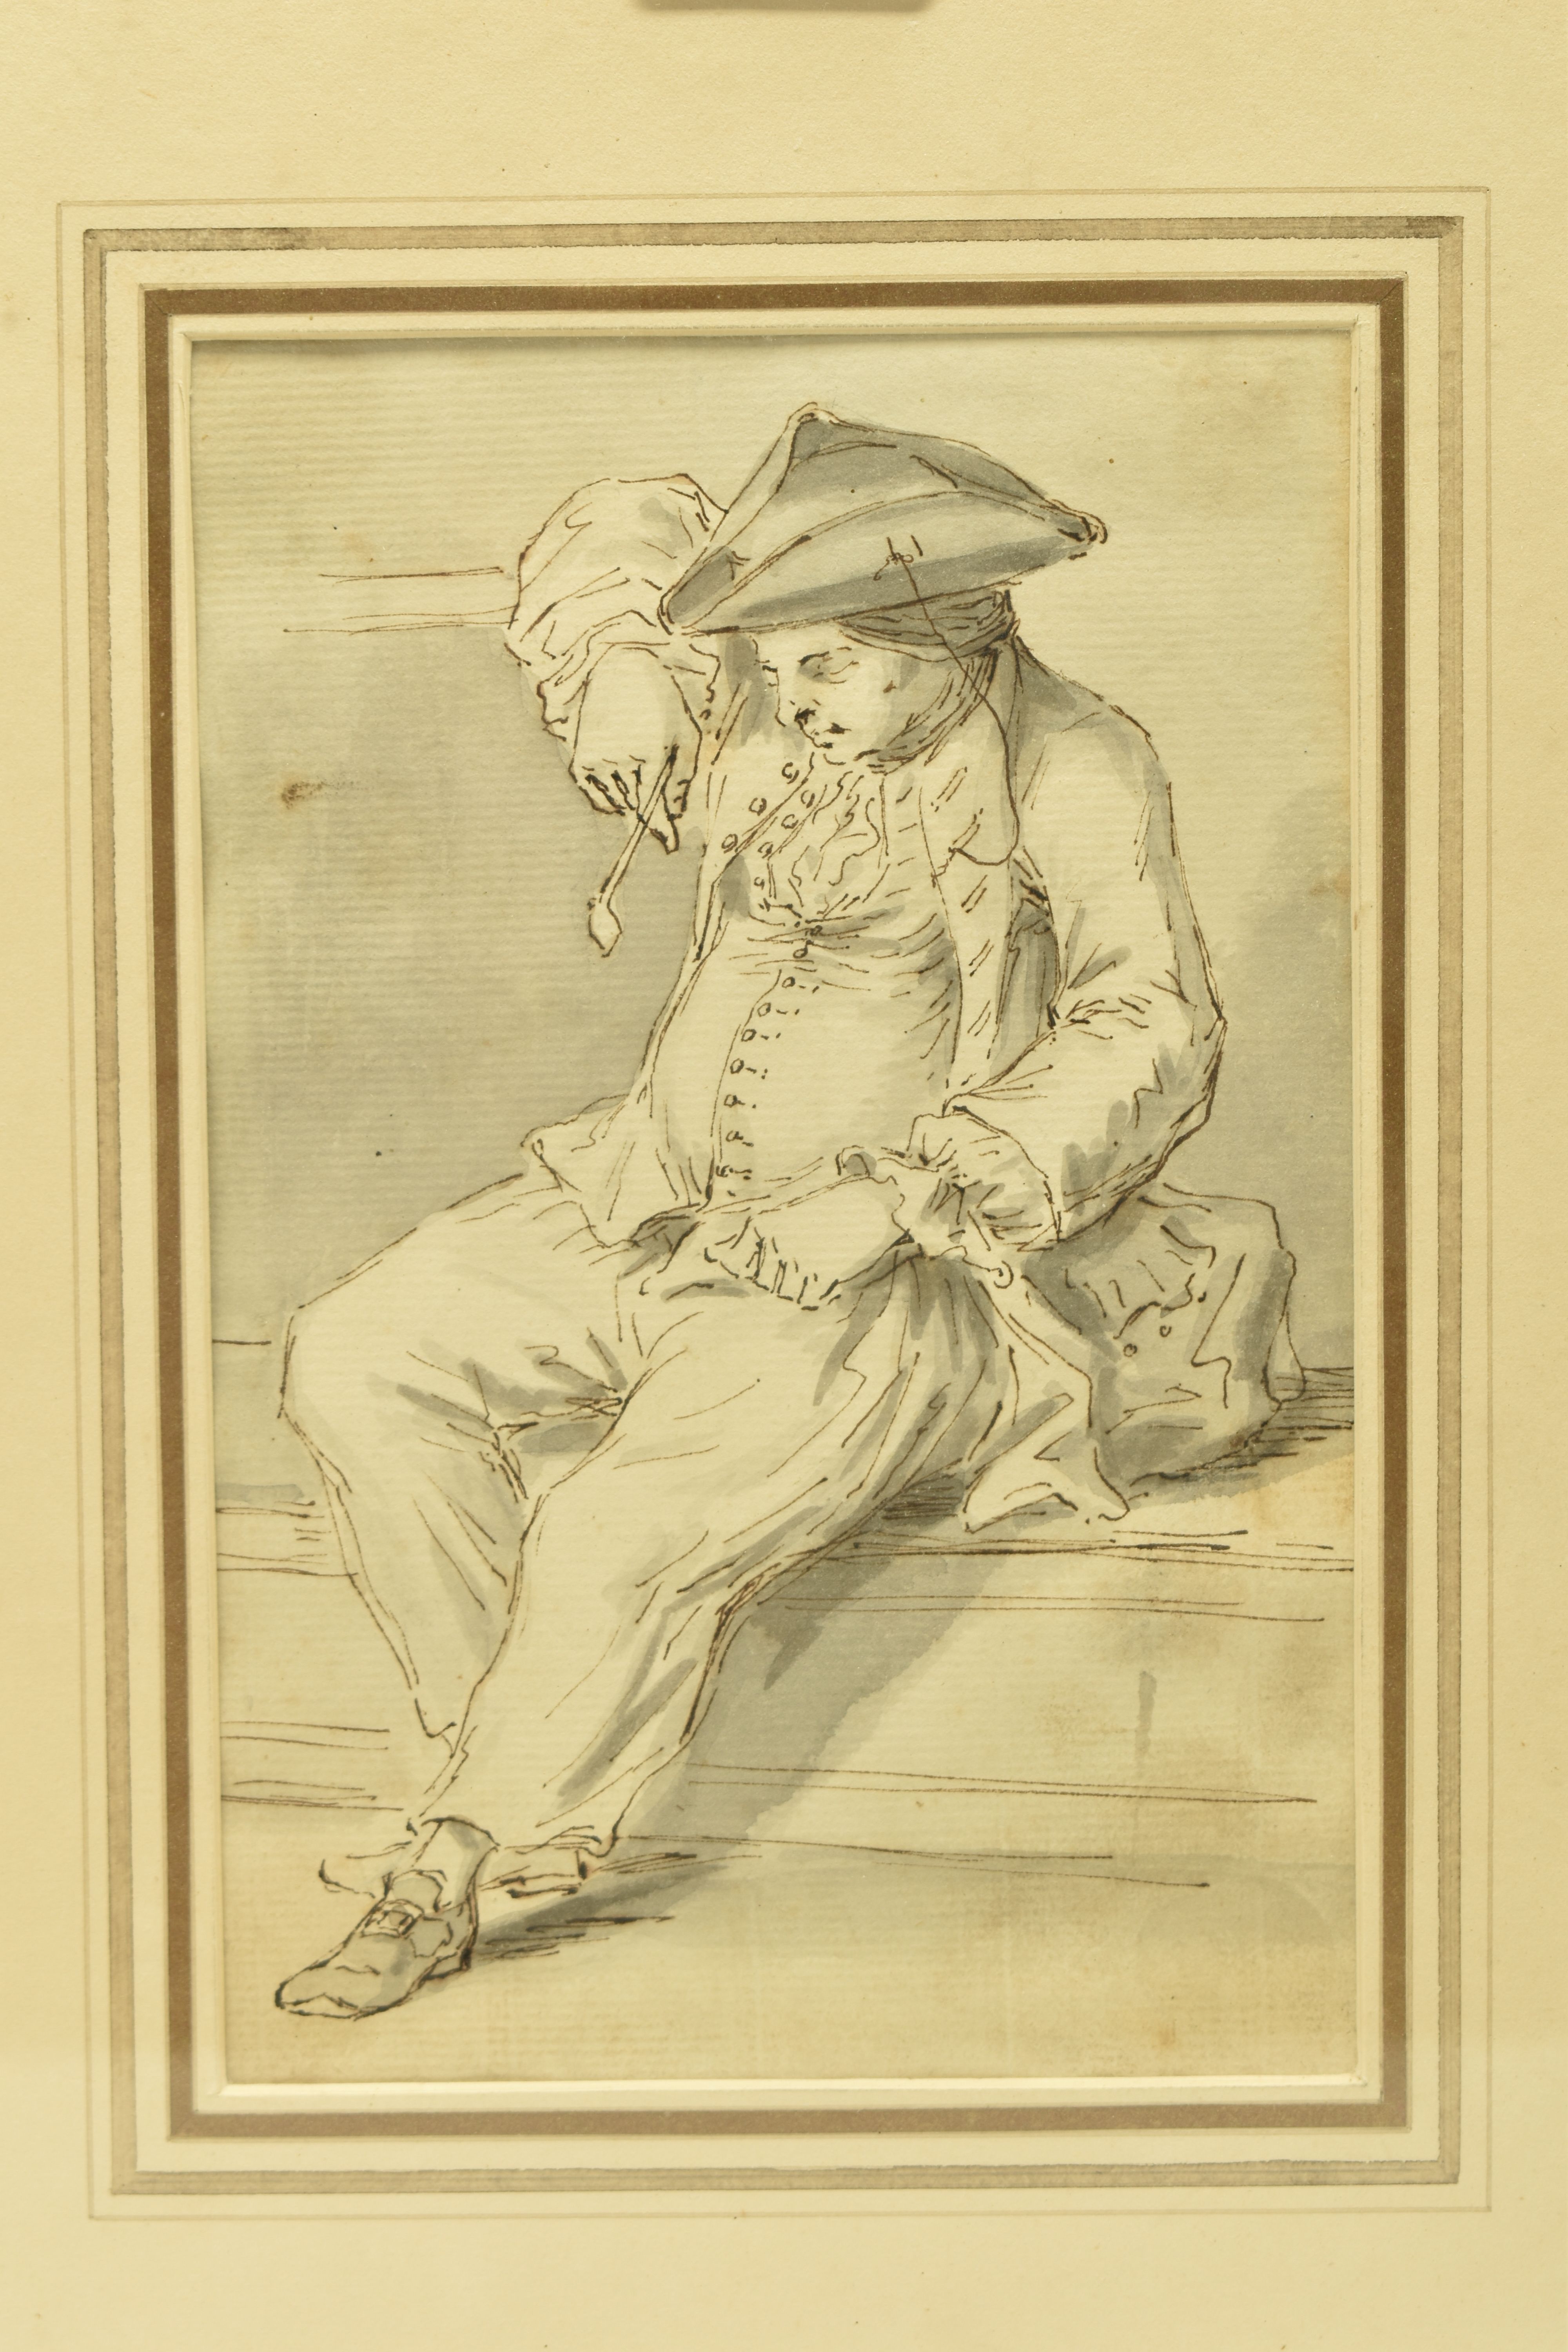 ATTRIBUTED TO LOUIS PHILIPPE BOITARD (?-circa 1770) A STUDY OF A SLEEPING MAN WITH A PIPE, unsigned, - Image 2 of 7